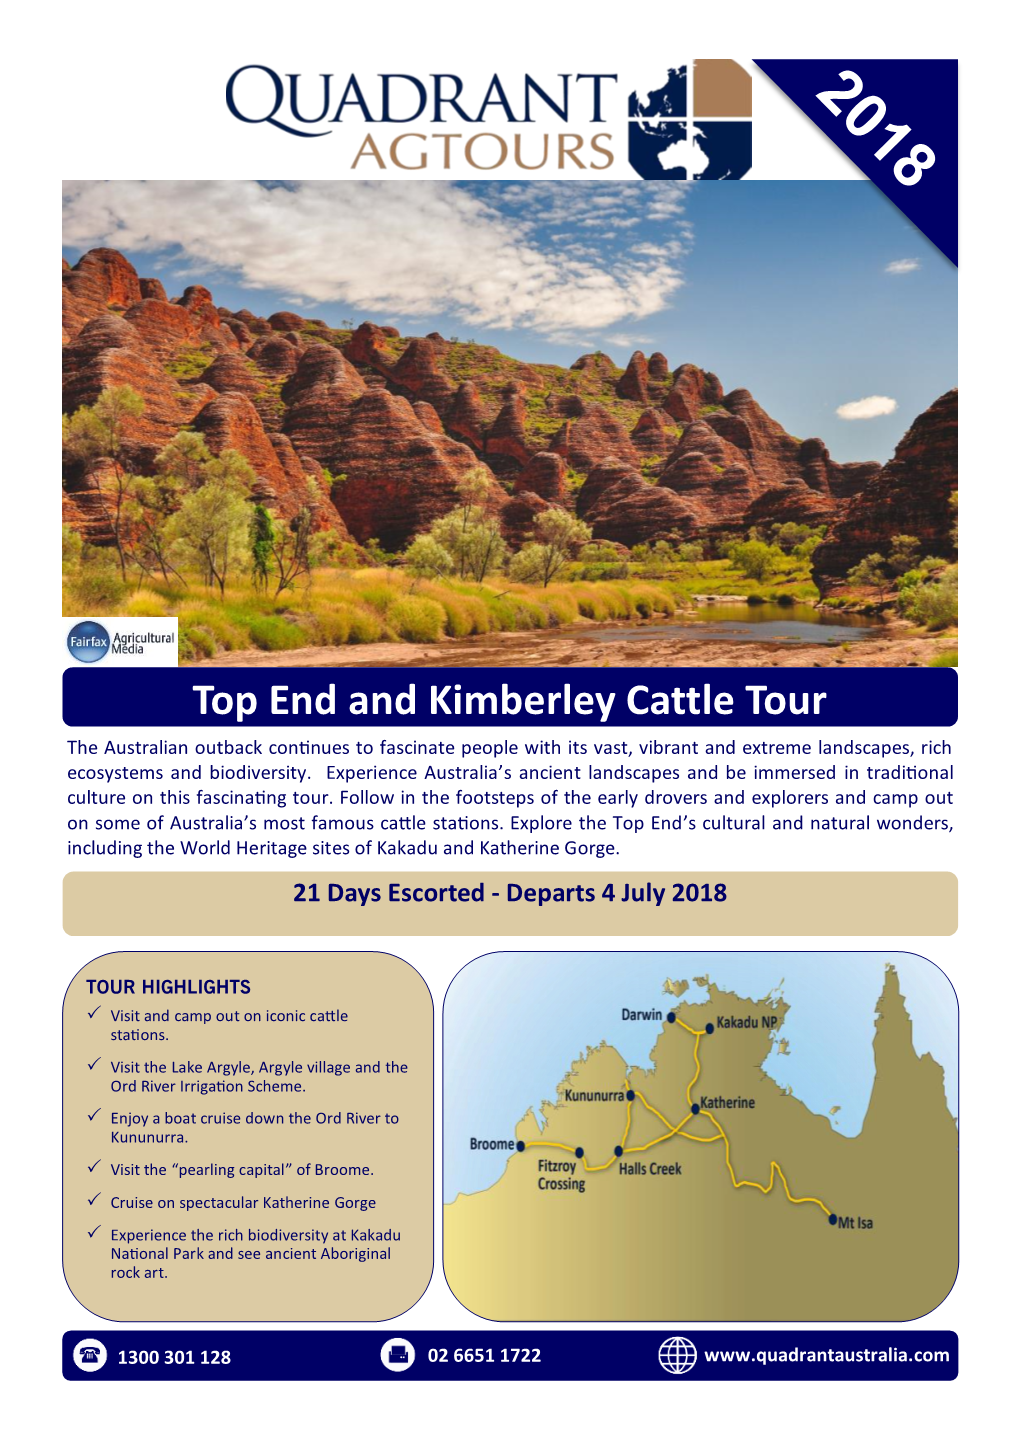 Top End and Kimberley Cattle Tour the Australian Outback Continues to Fascinate People with Its Vast, Vibrant and Extreme Landscapes, Rich Ecosystems and Biodiversity